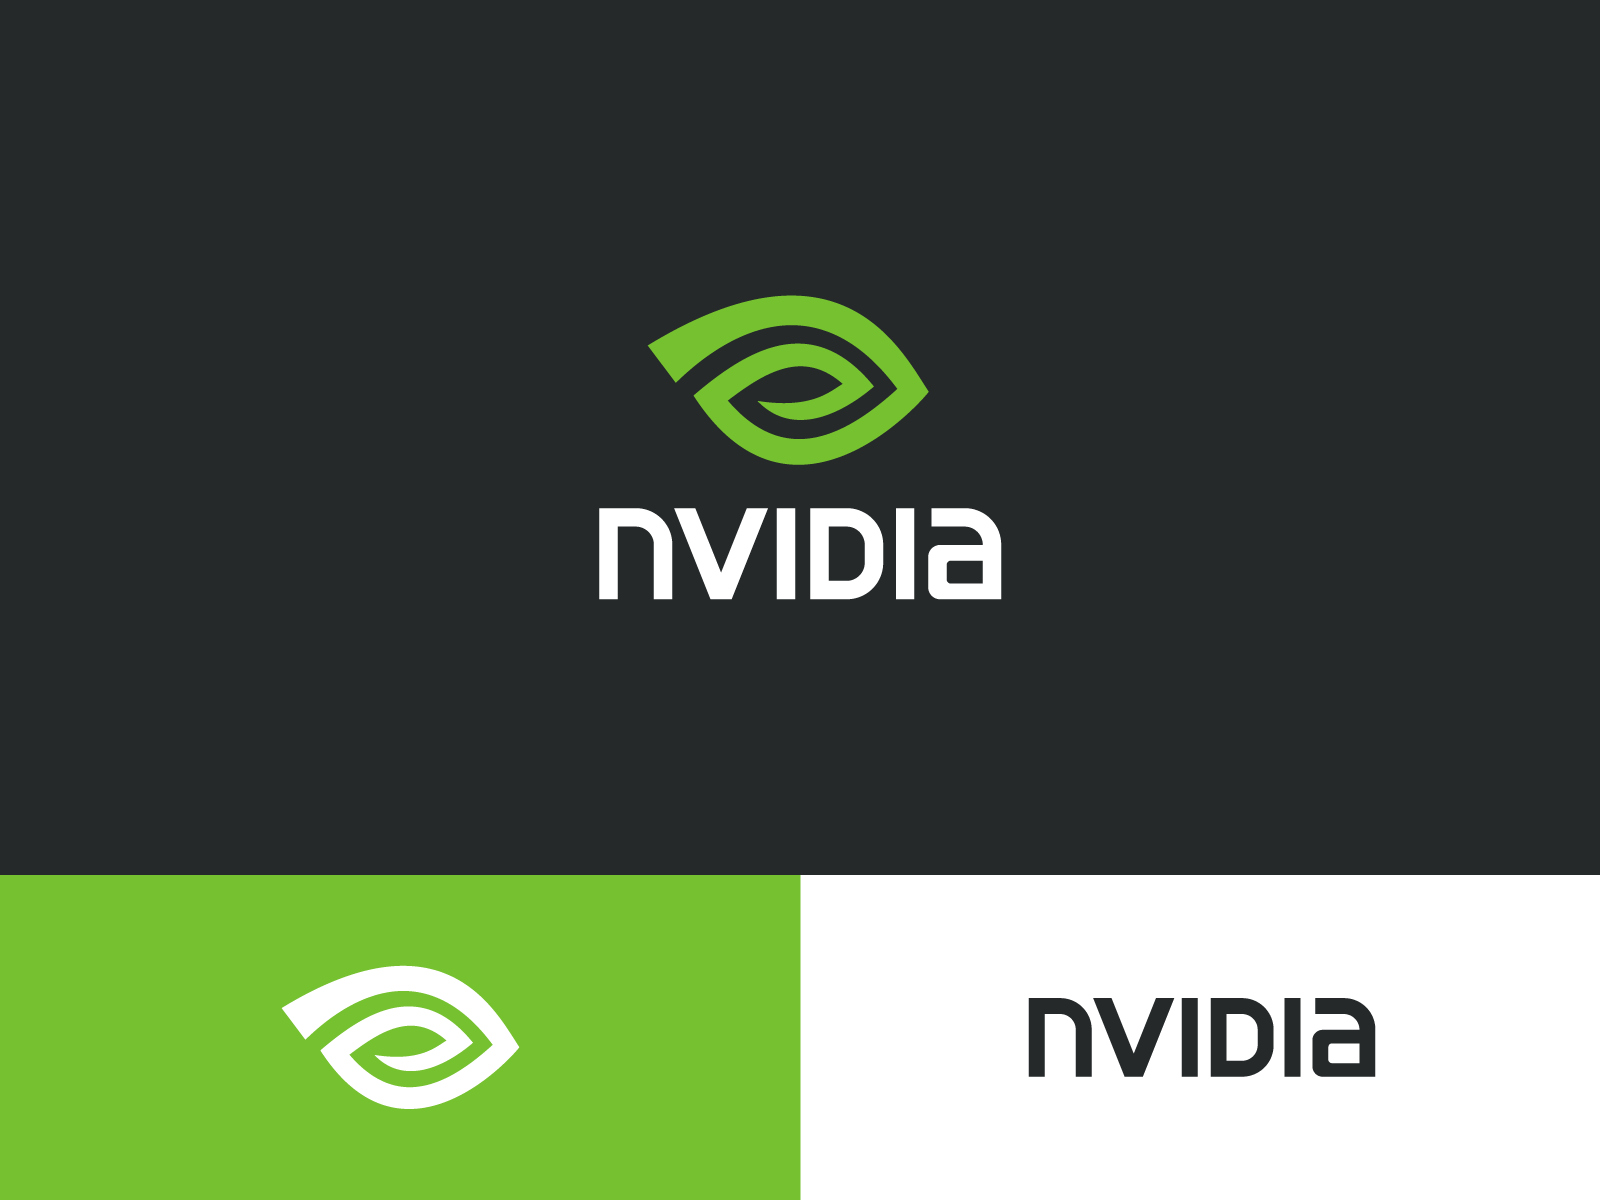 Nvidia Logo Redesign By Cameron Giles On Dribbble